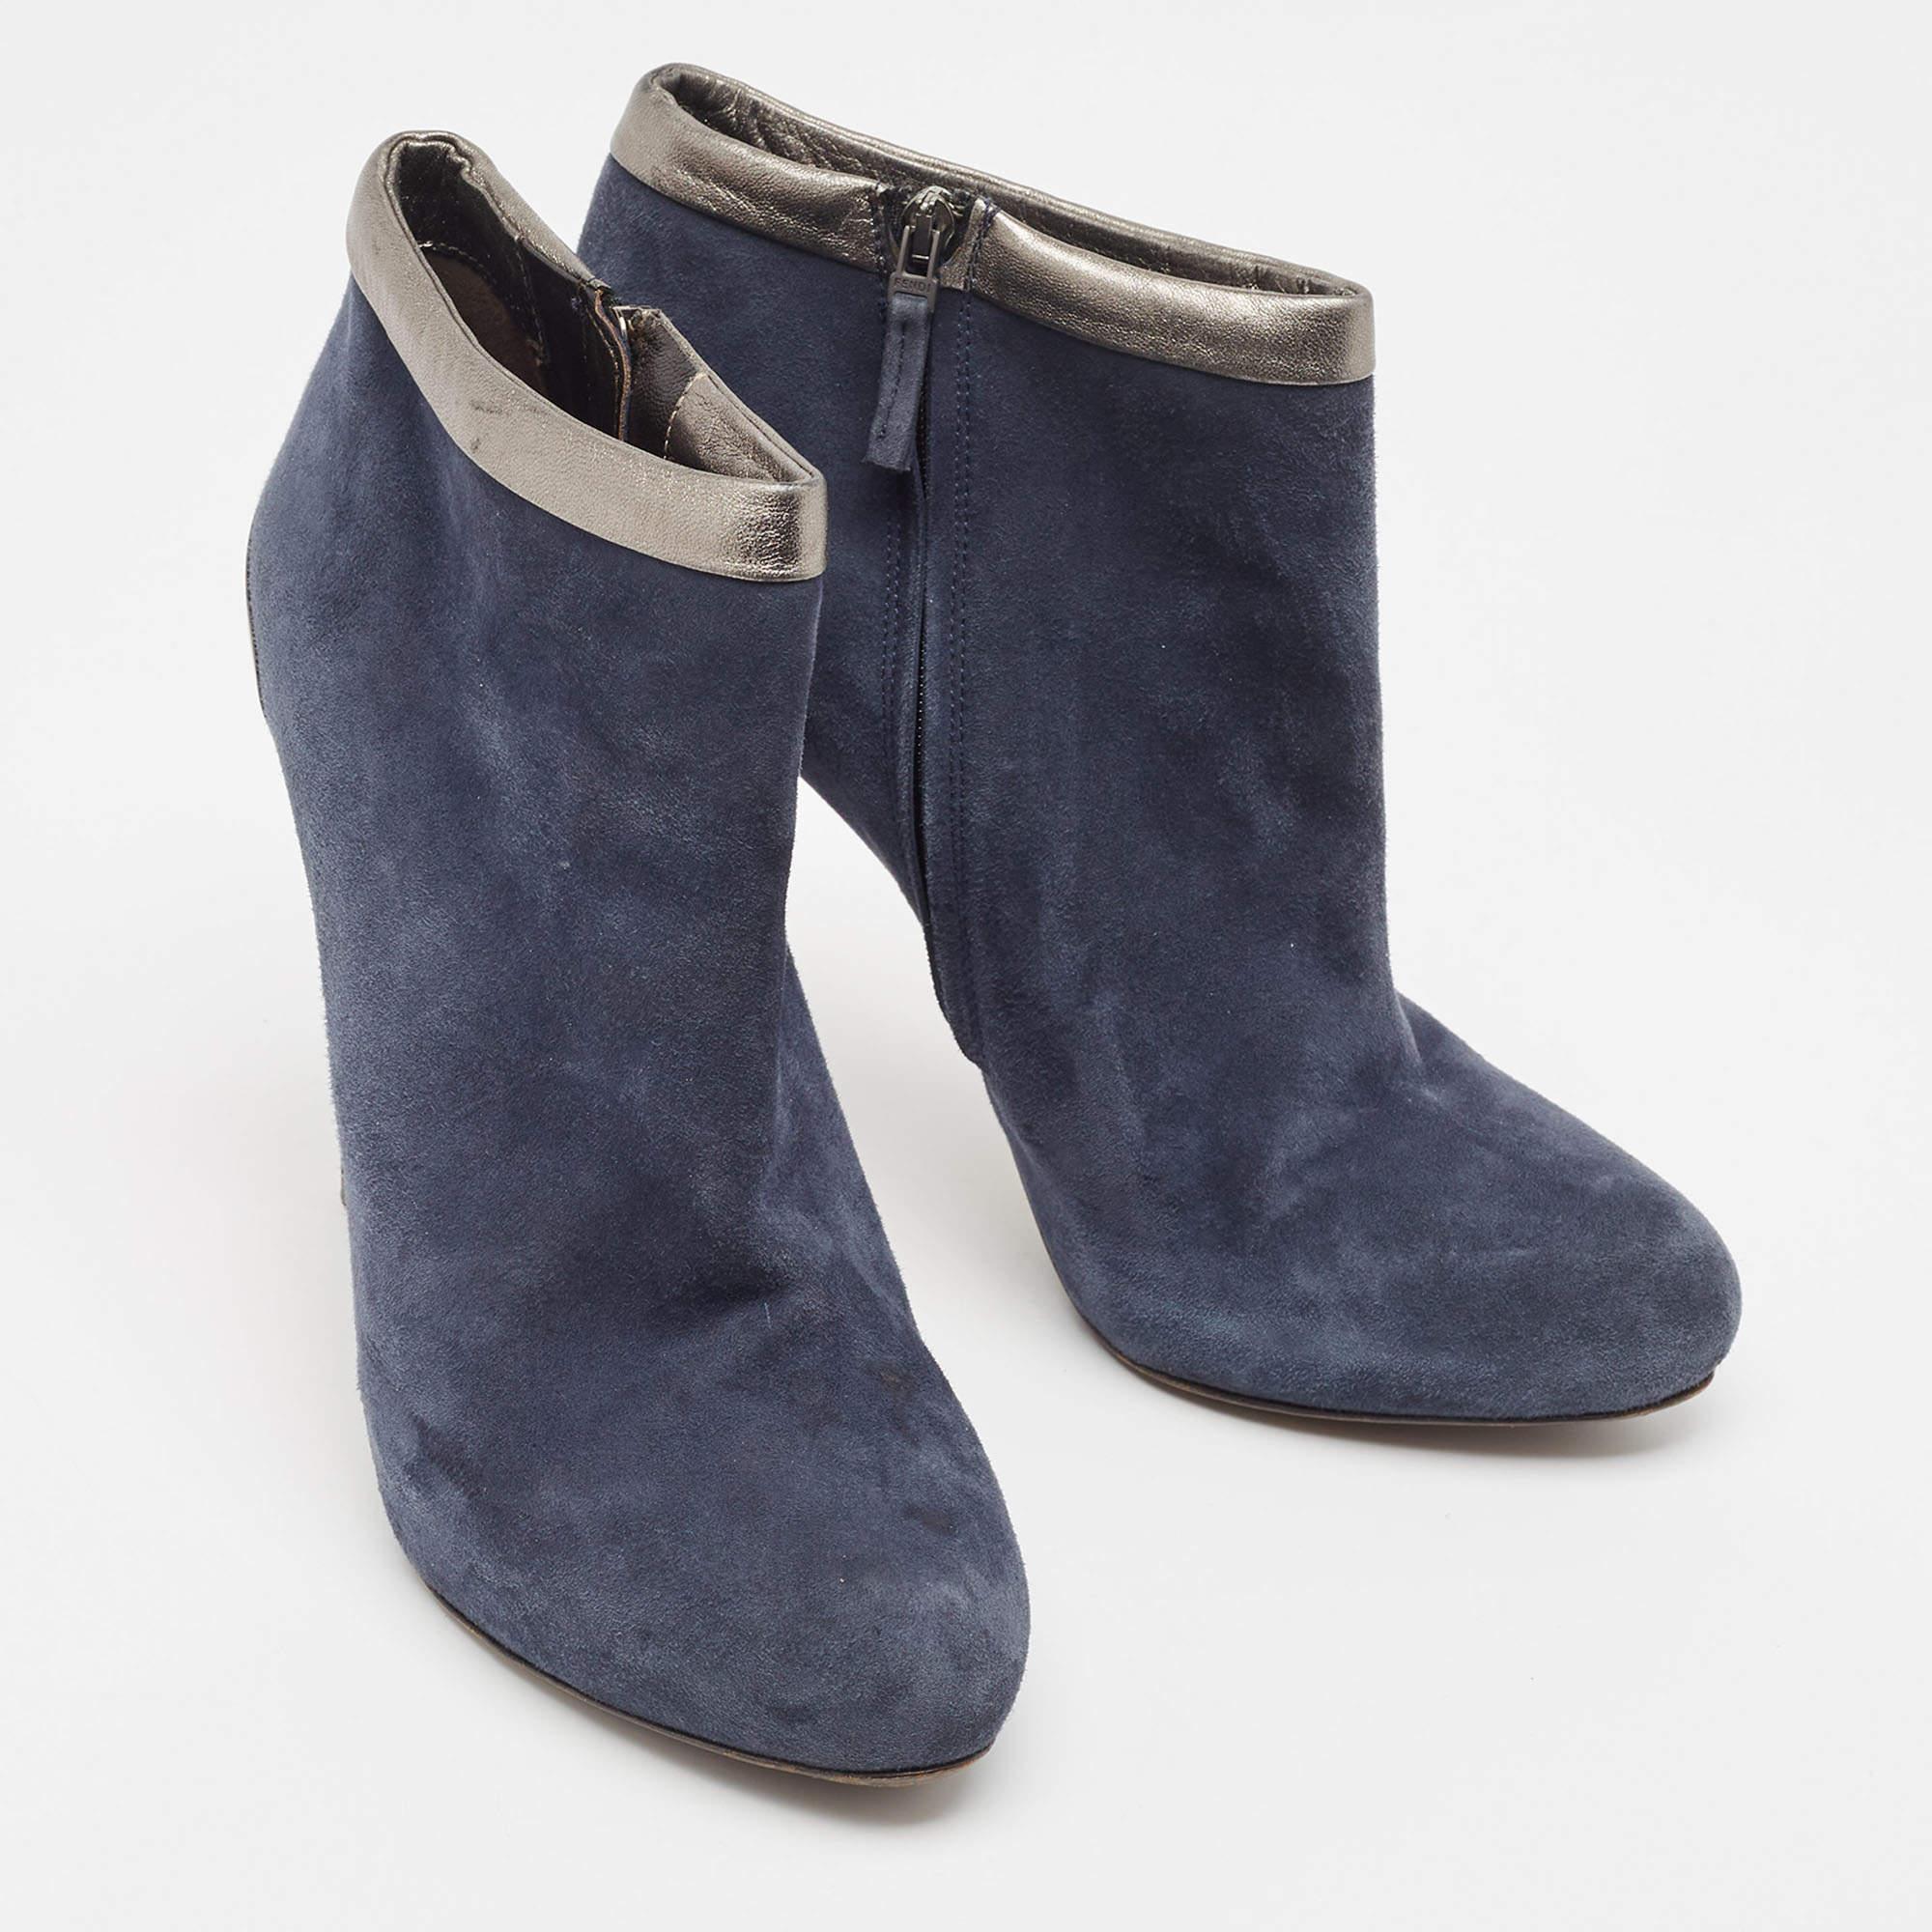 Fendi Navy Blue Suede Ankle Booties Size 39.5 3